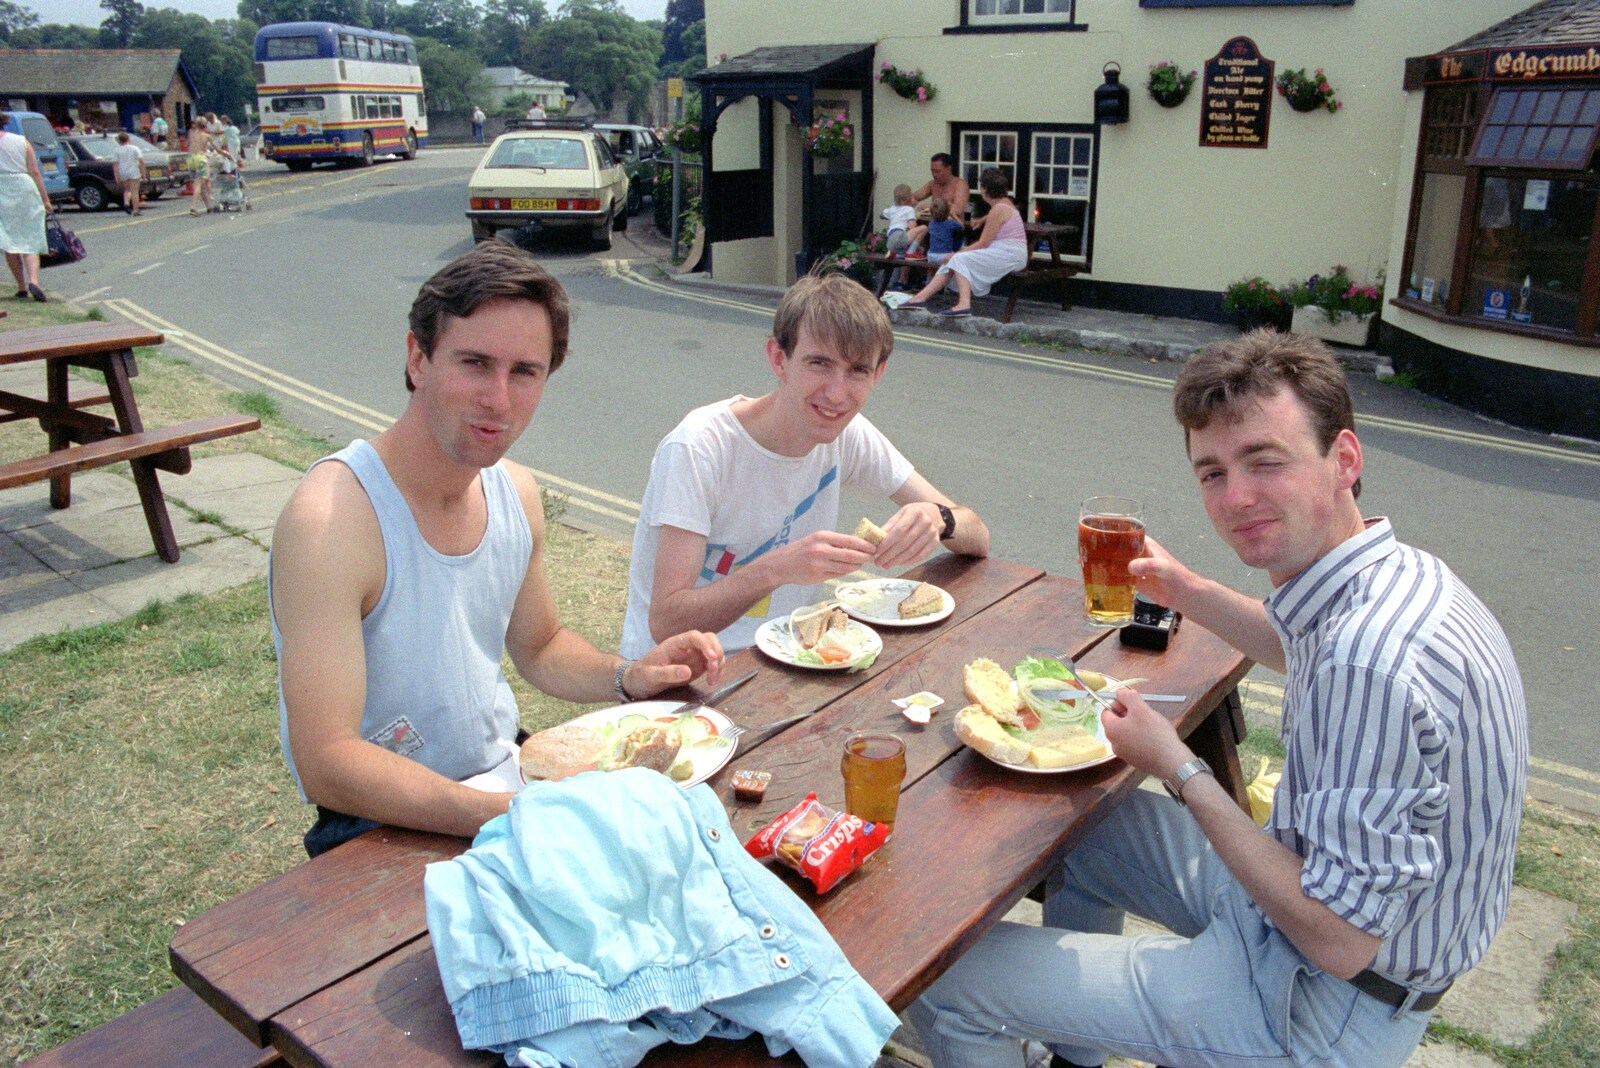 Riki, Dave and John outside the Edgcumbe Arms from Uni: A Trip to Mount Edgcumbe, Cornwall - 17th June 1989